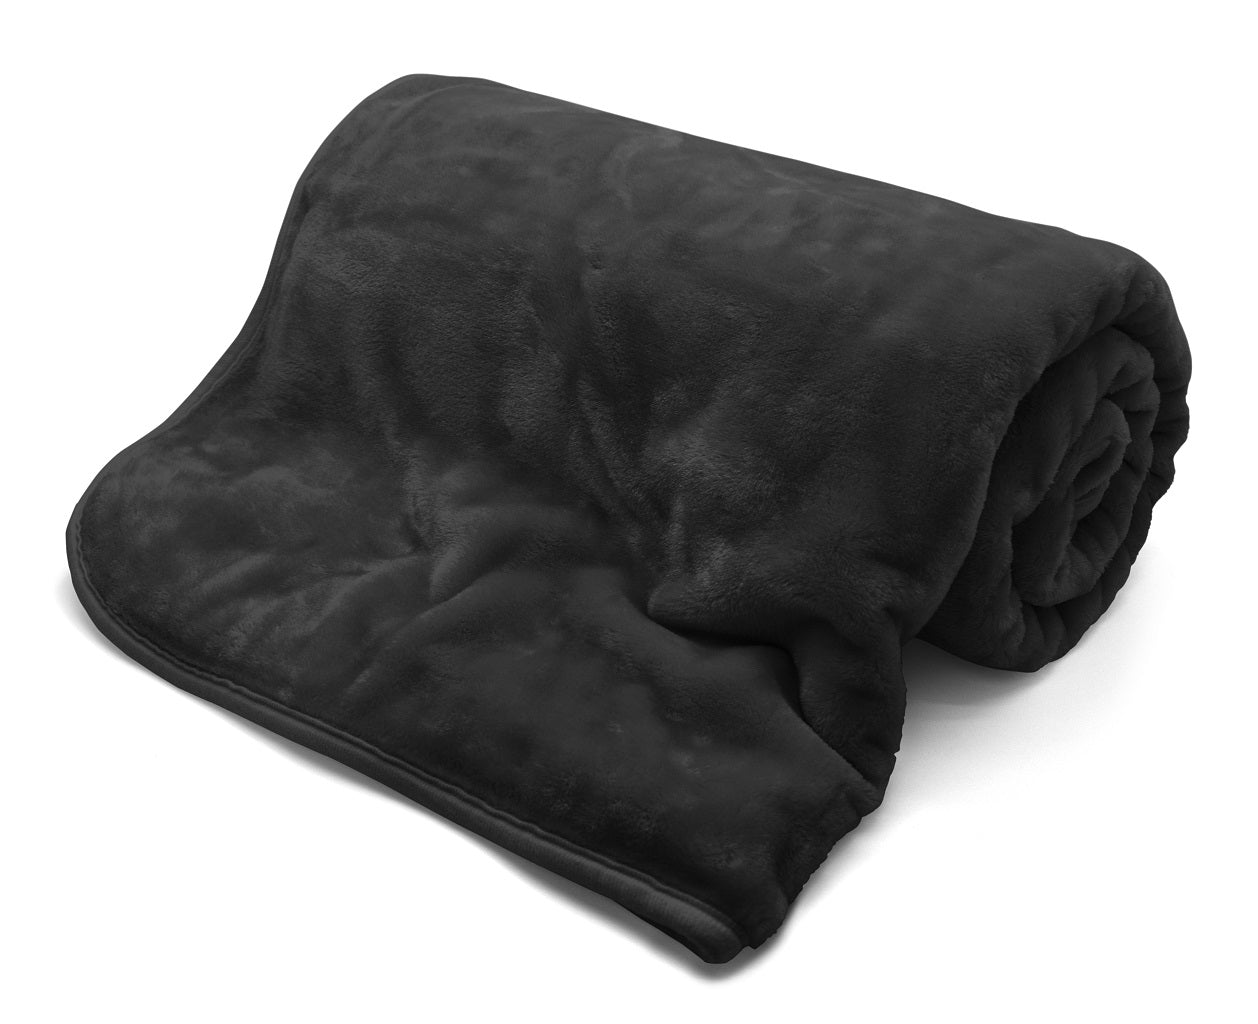 Mink Throws Blanket For Couch - TheComfortshop.co.ukThrows0721718973669thecomfortshopTheComfortshop.co.ukmink-throws-blanket-for-couchBlackSingleMink Throws Blanket For Couch - TheComfortshop.co.uk